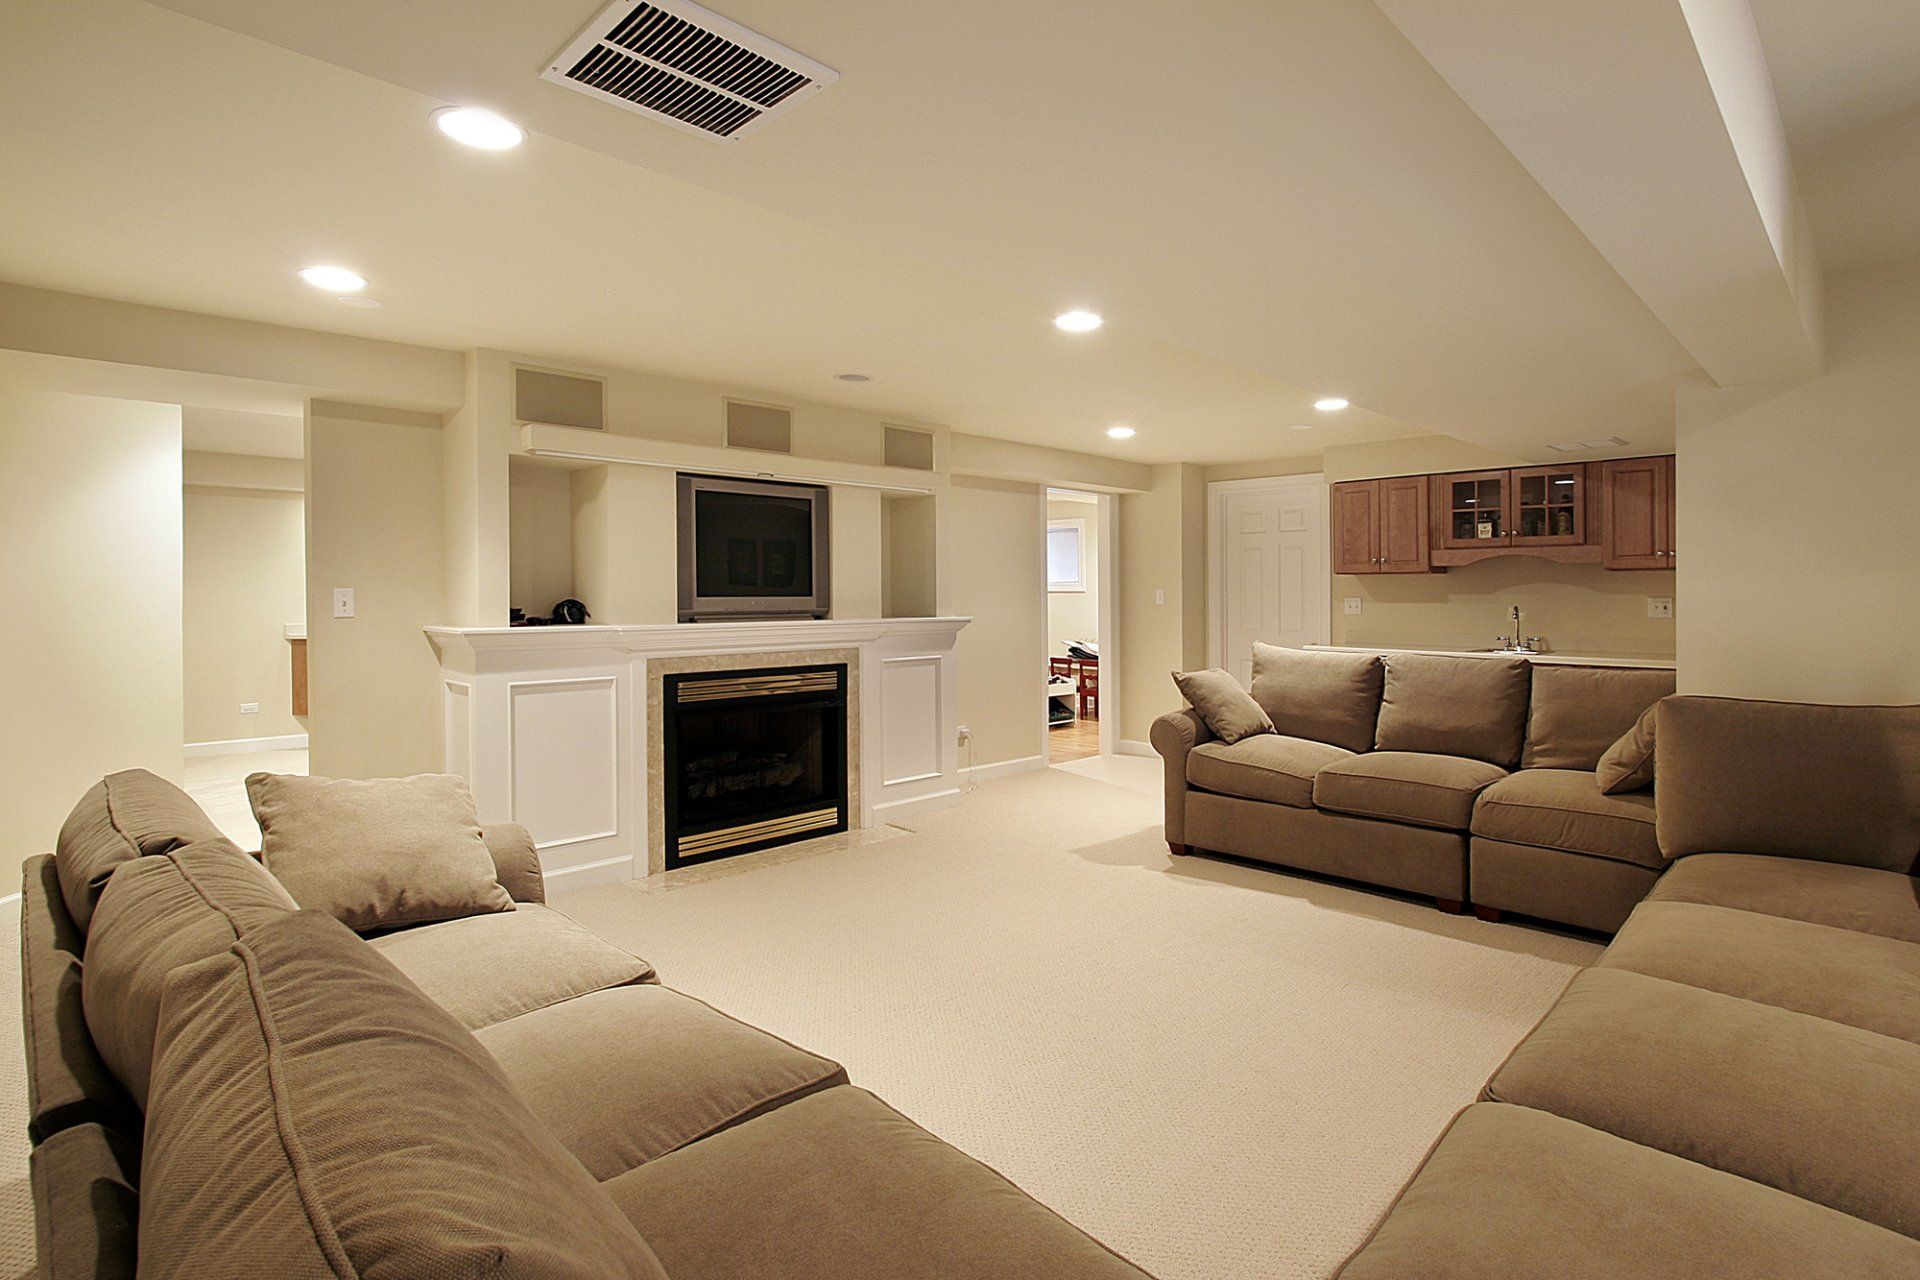 Basement Remodeling in Havertown, PA